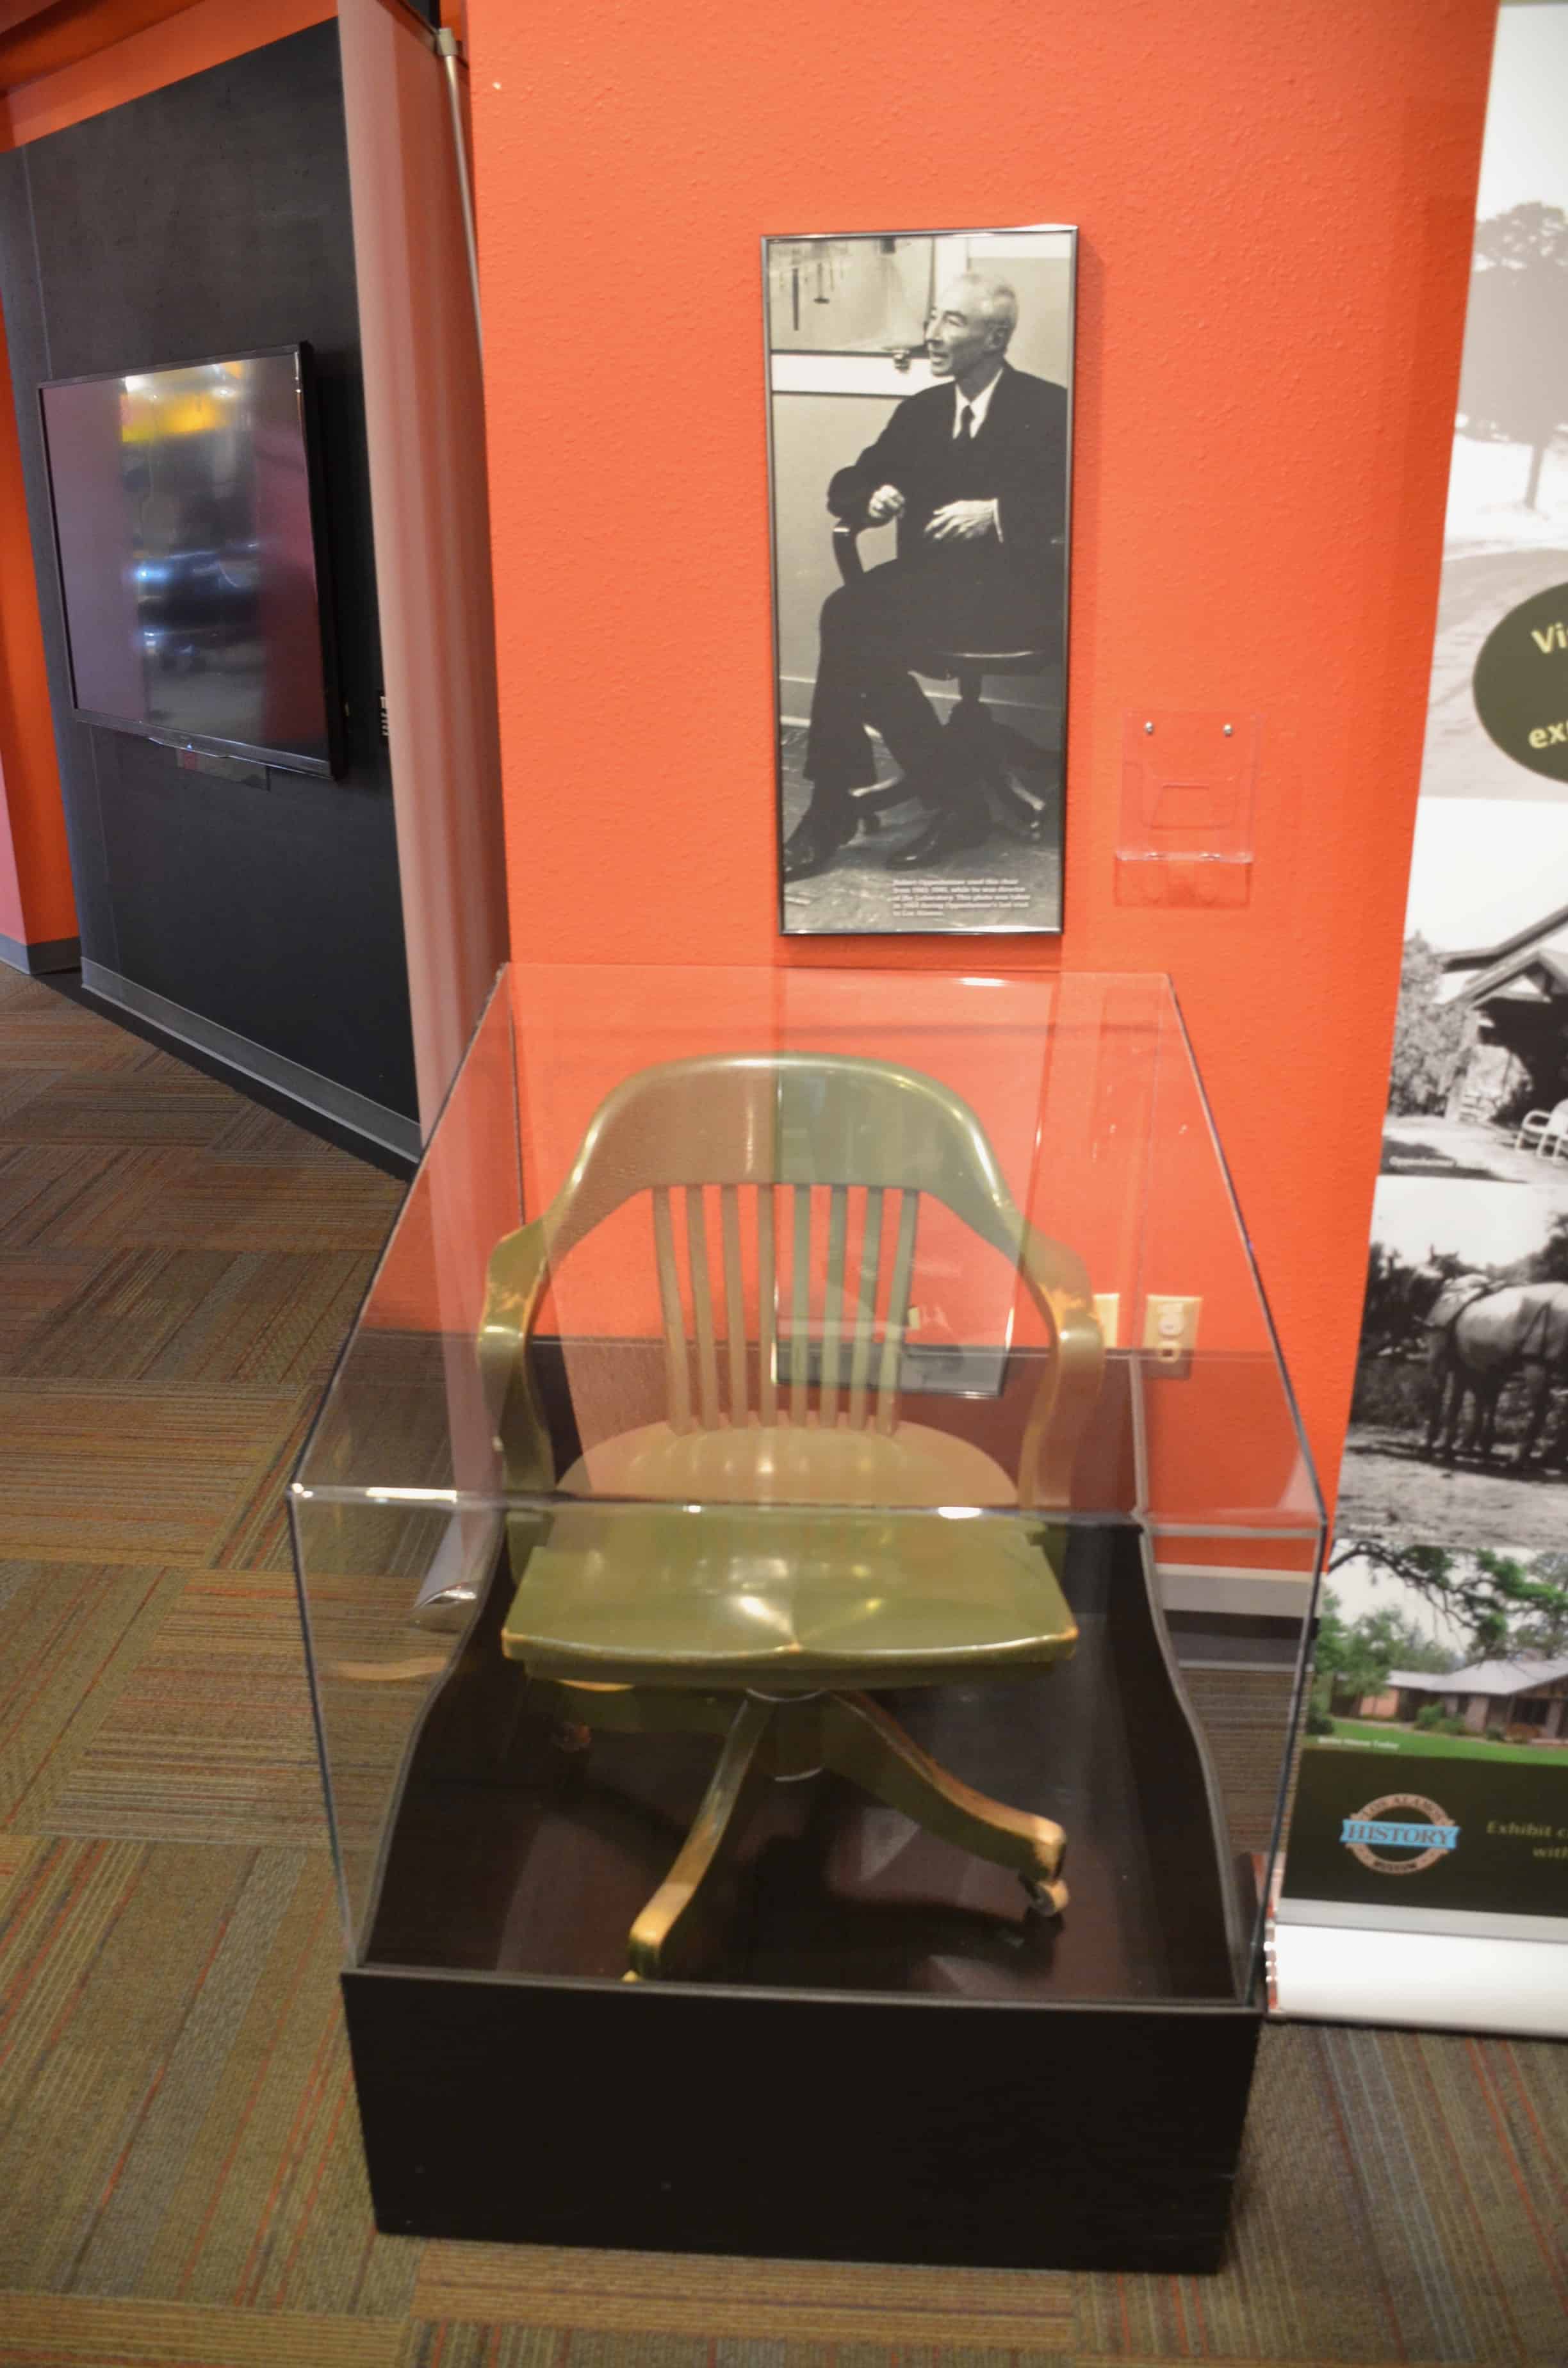 J. Robert Oppenheimer's chair at the Bradbury Science Museum in Los Alamos, New Mexico